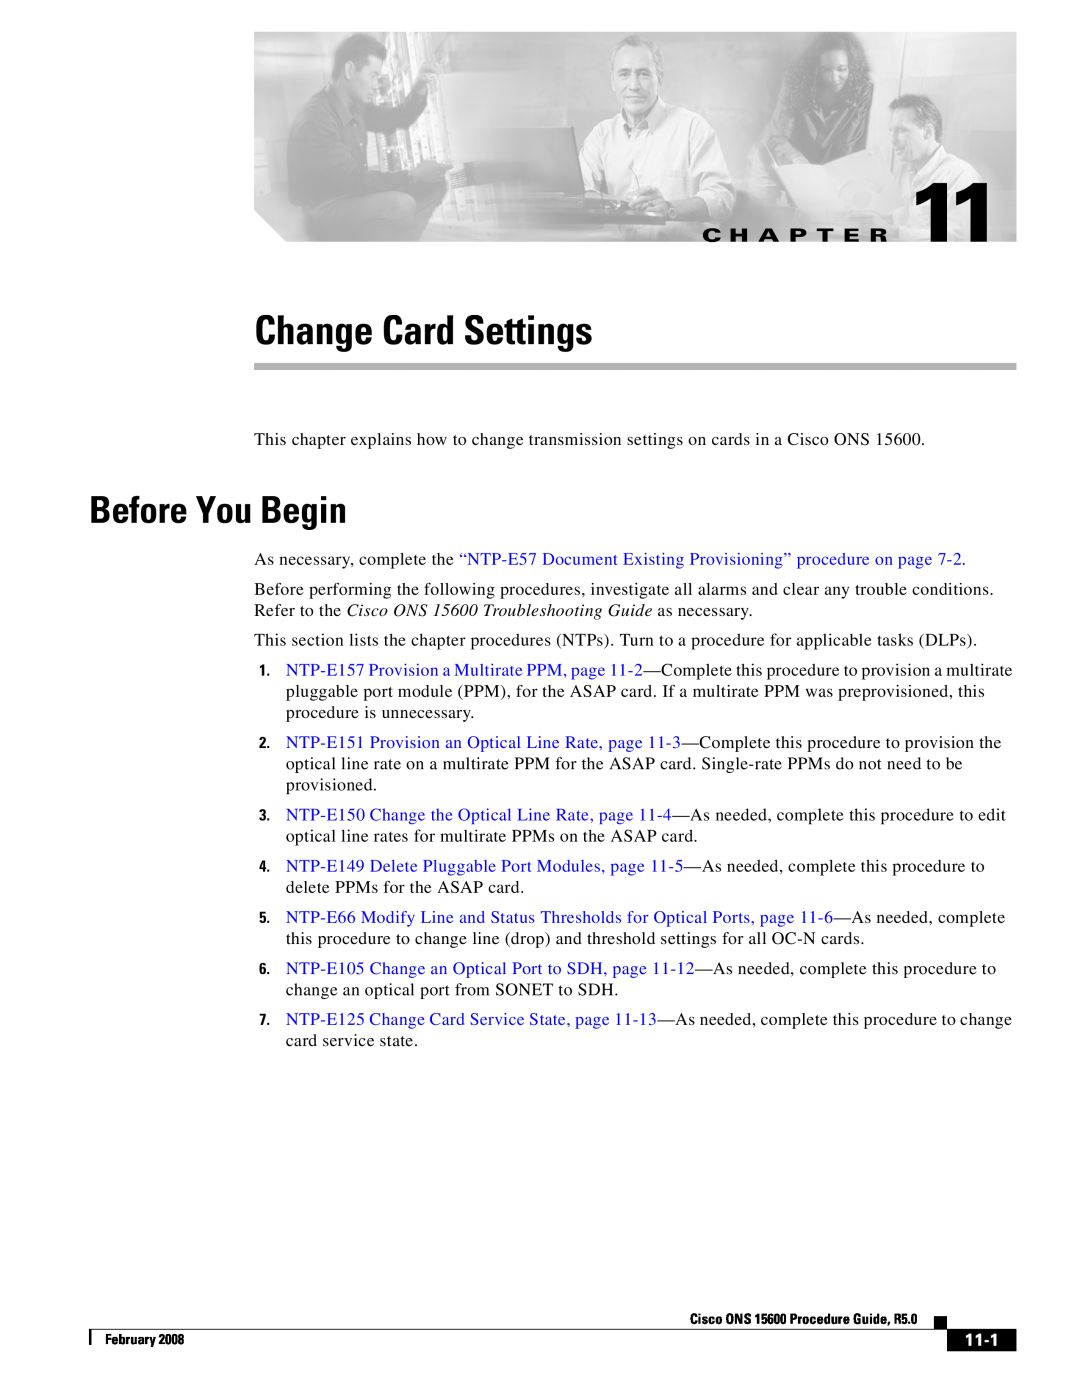 Cisco Systems ONS 15600 manual Before You Begin, 11-1, Change Card Settings, C H A P T E R 